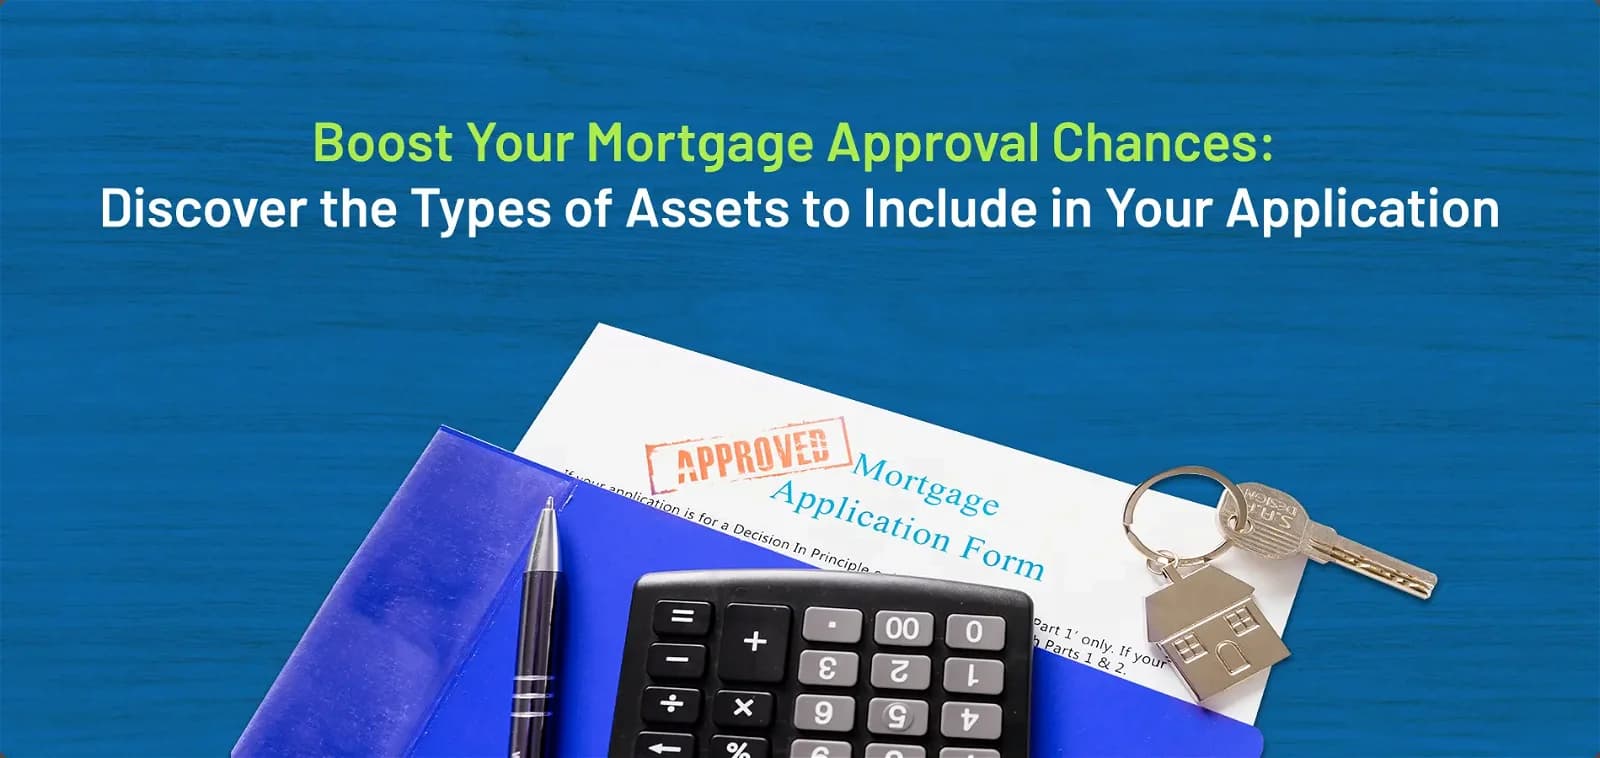 Boost Your Mortgage Approval Chances: Discover the Types of Assets To Include in Your Application